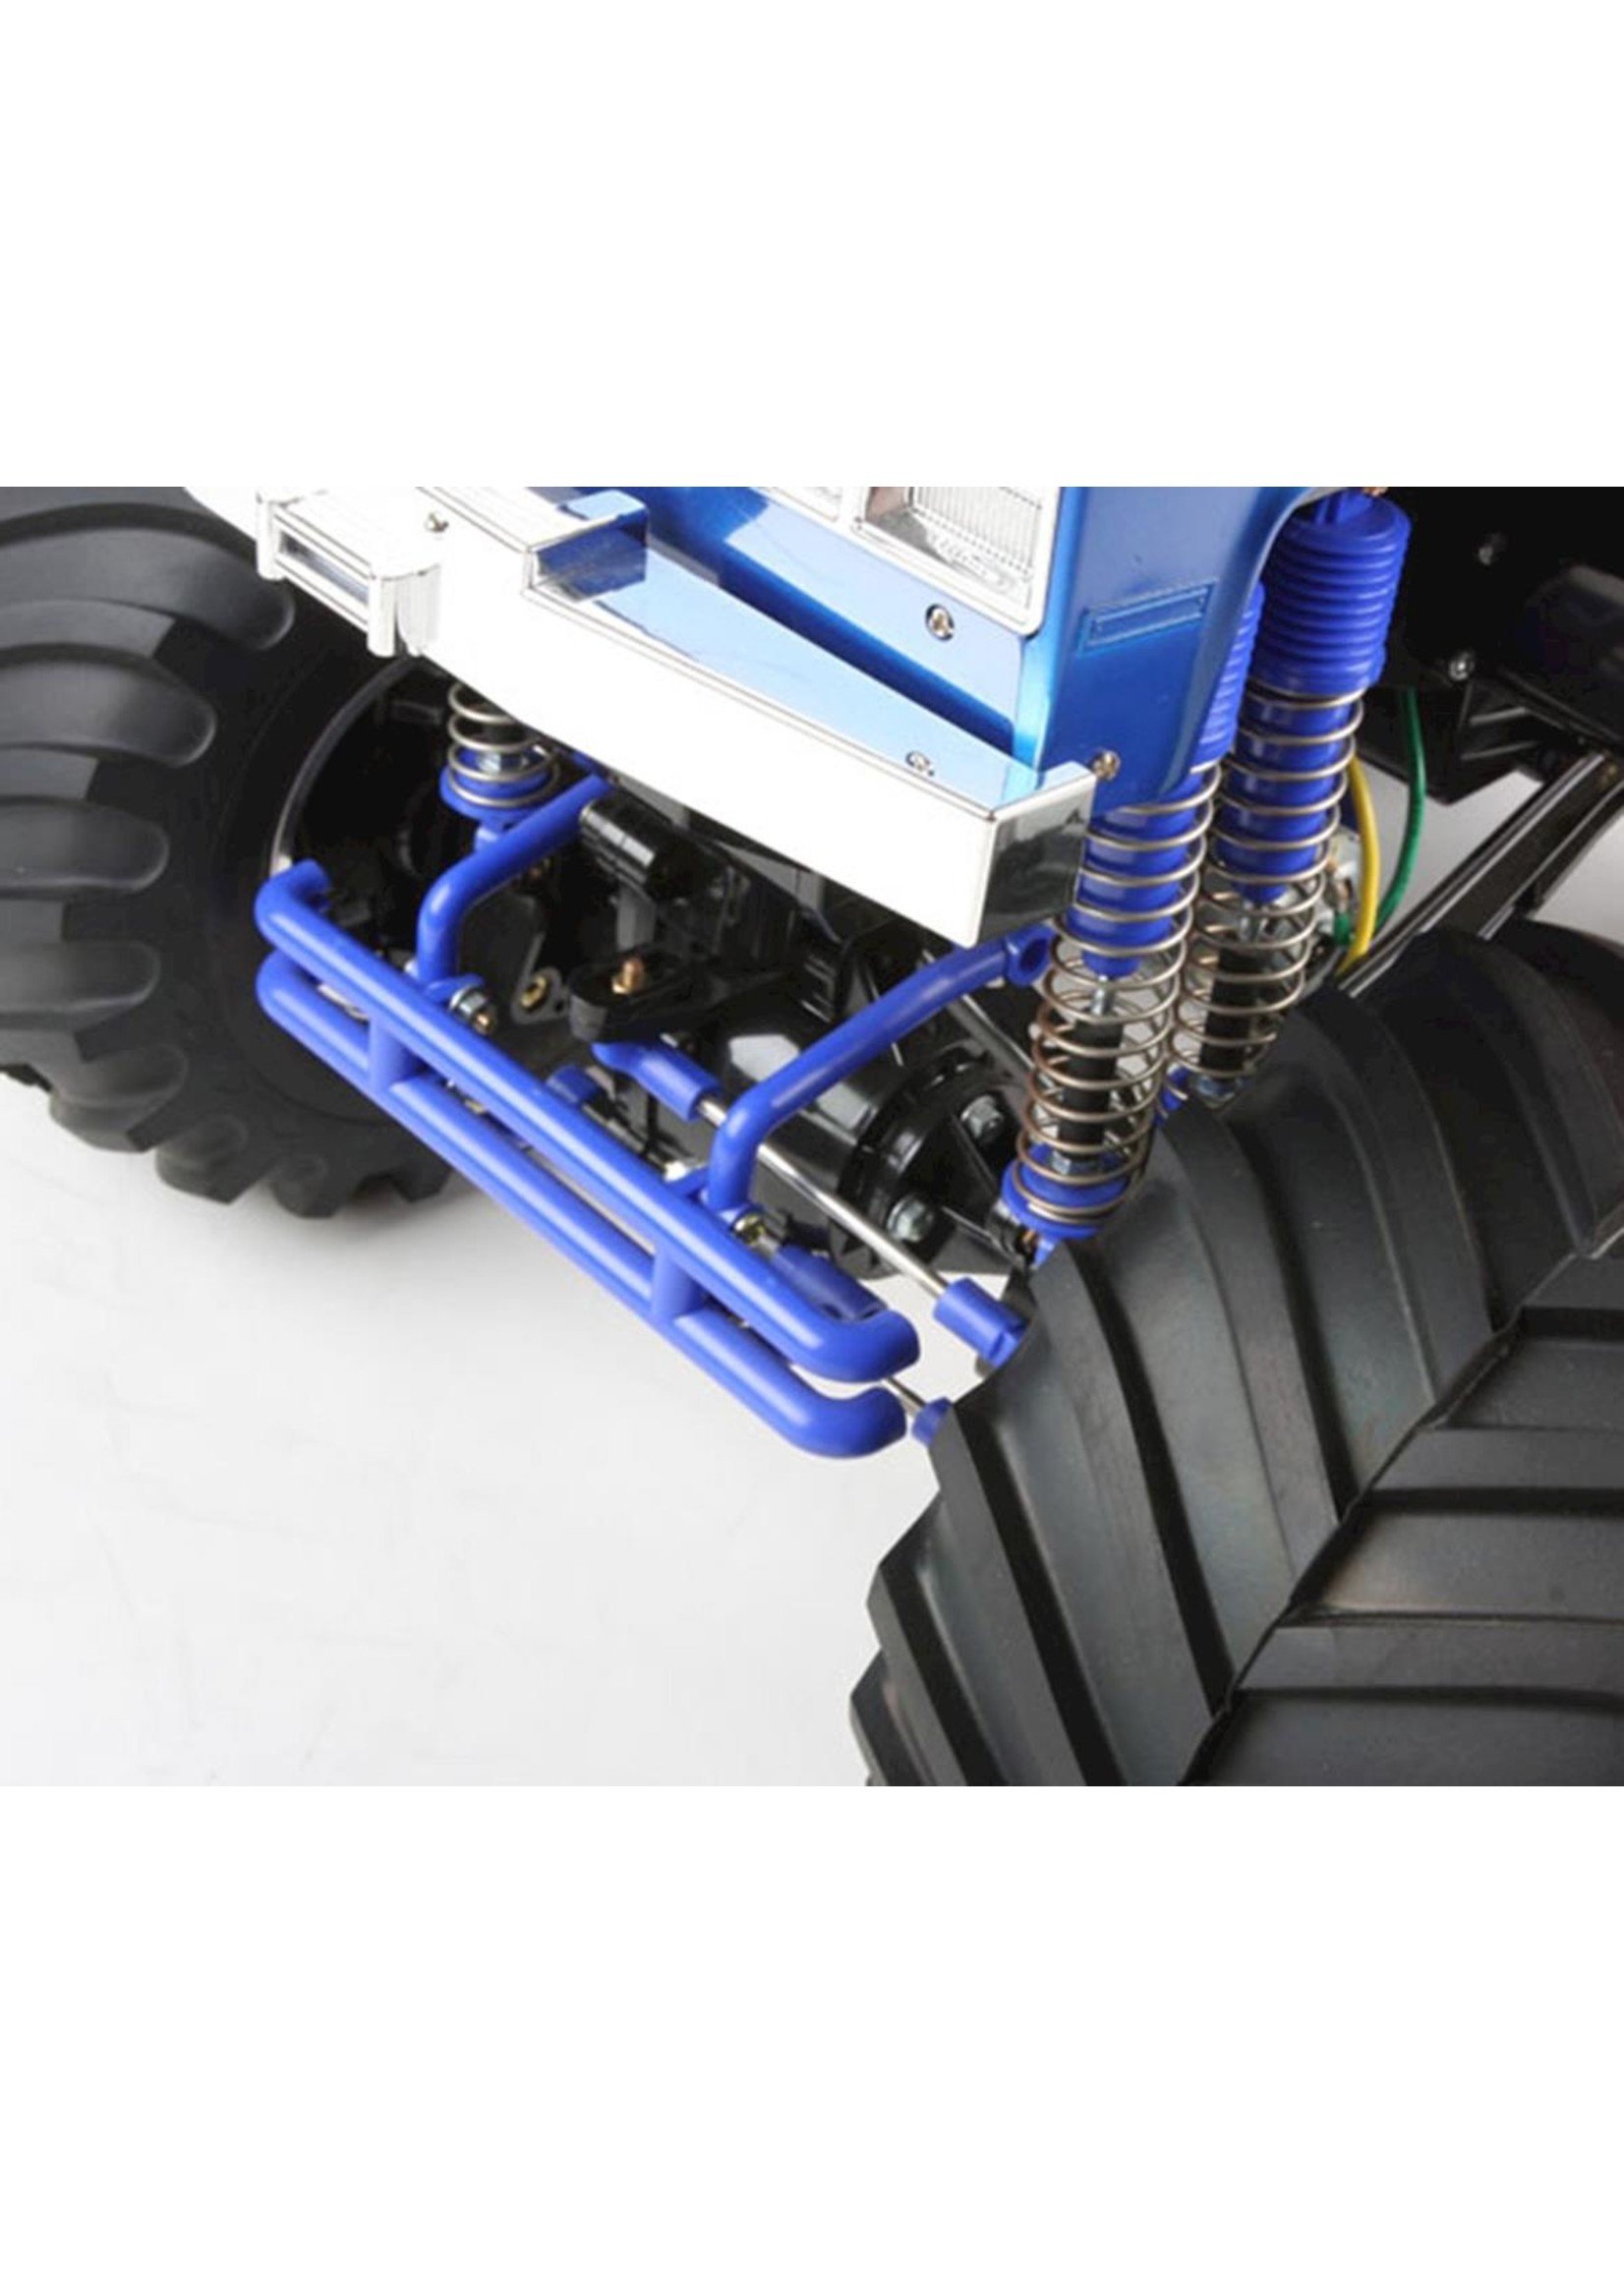 Tamiya 1-10 Scale RC Super Clod Buster Truck Kit 